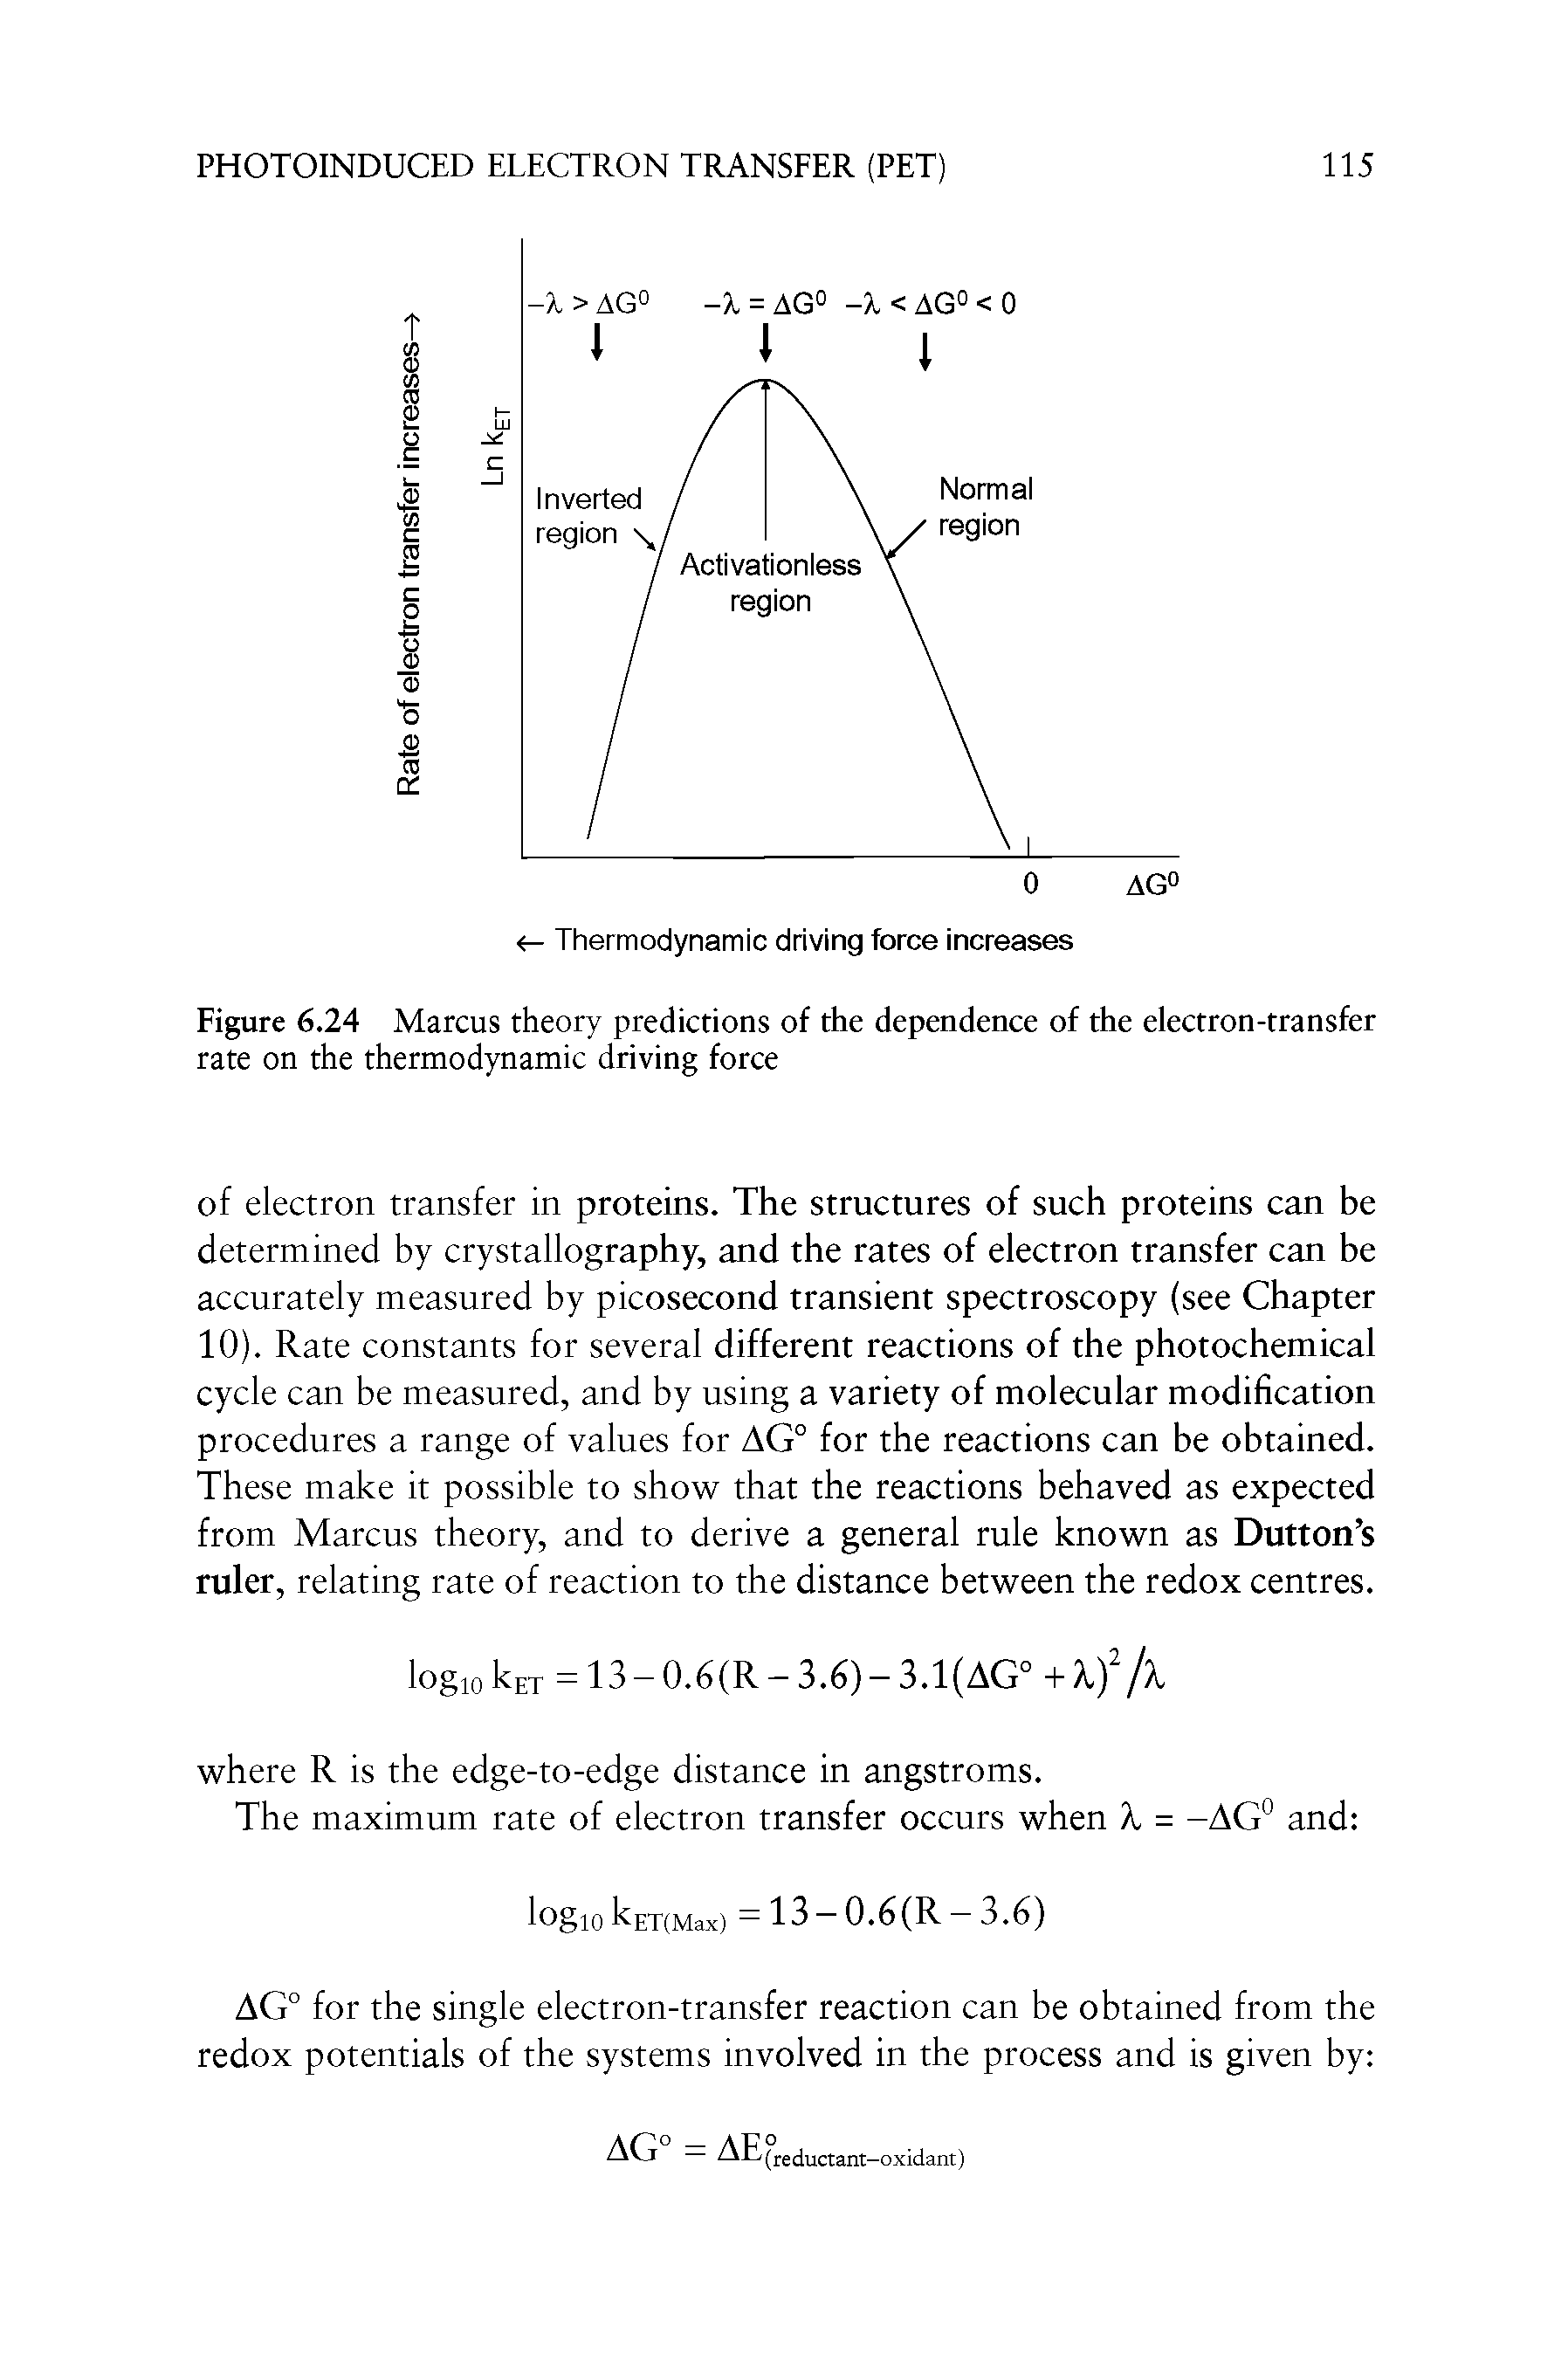 Figure 6.24 Marcus theory predictions of the dependence of the electron-transfer rate on the thermodynamic driving force...